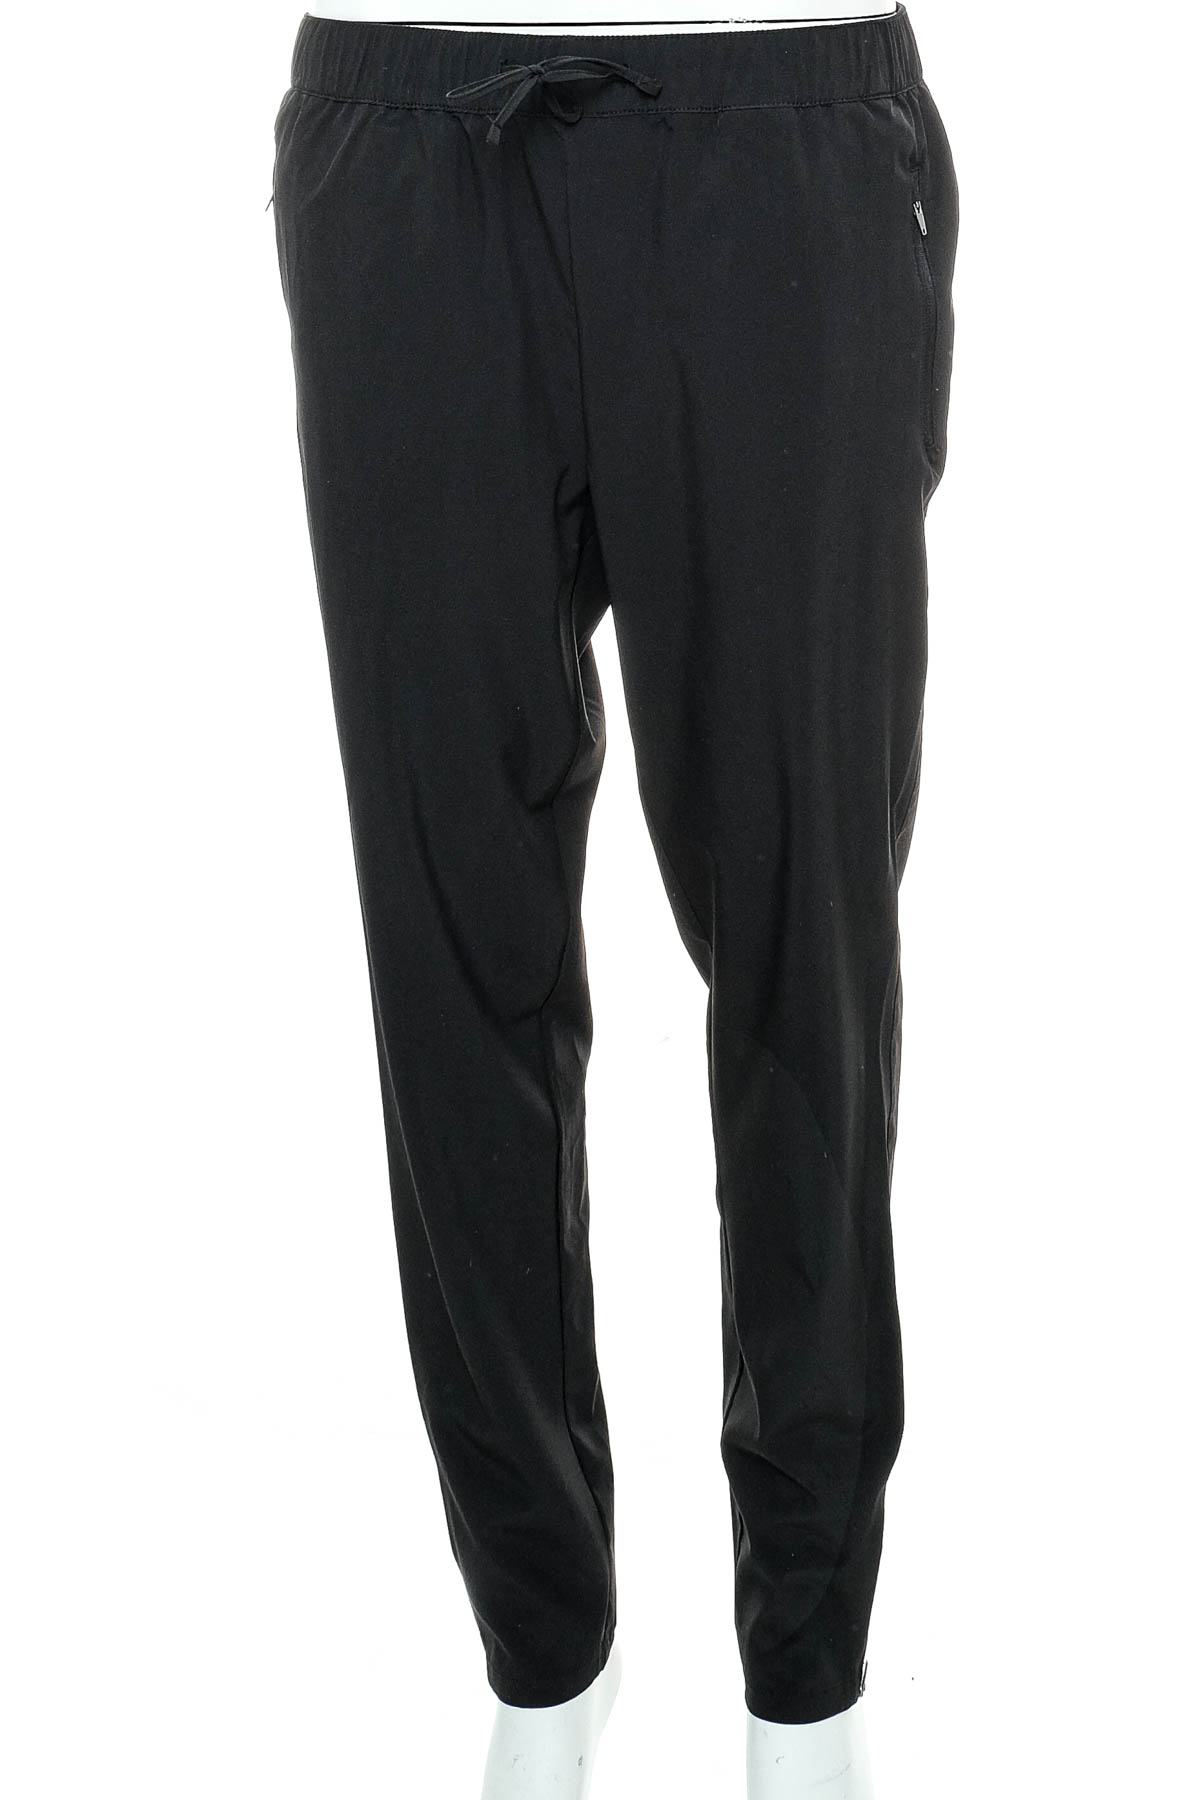 Women's trousers - Active Touch - 0